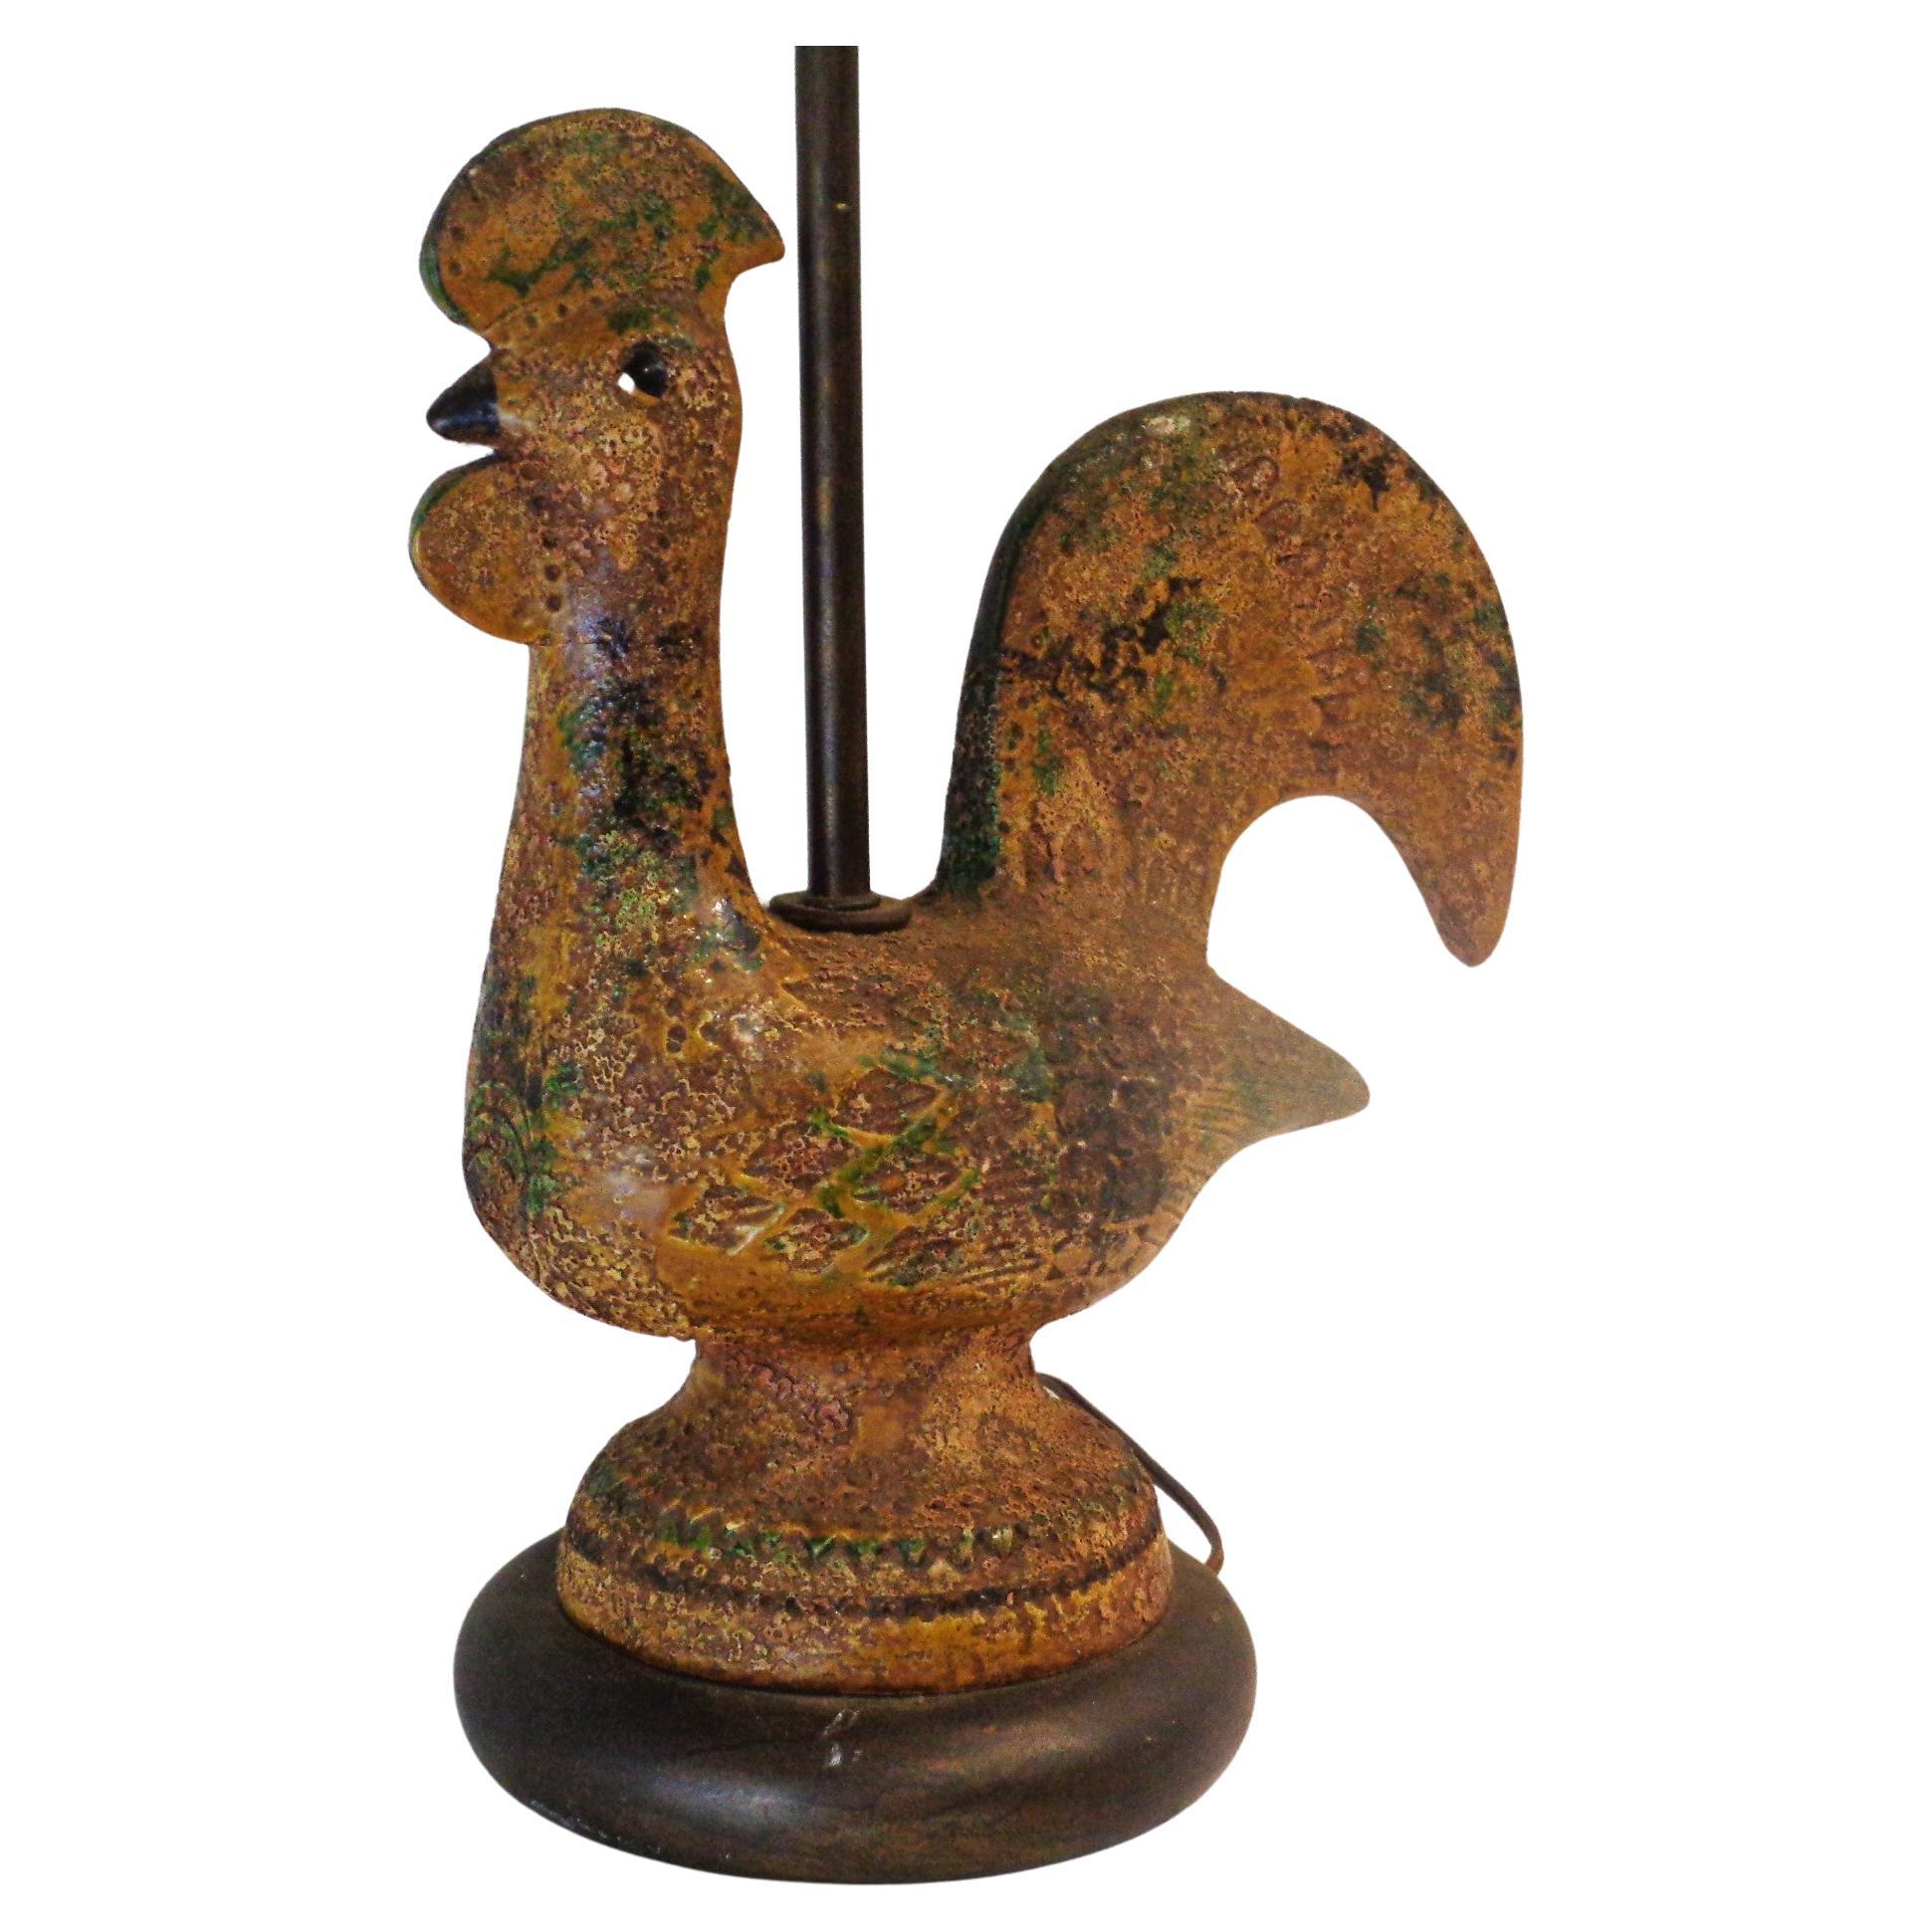 Bitossi pottery scavo glaze rooster lamp w/ beautifully textured tactile surface. Italy, circa 1950-1960. Ceramic rooster on original metal black base measures 13